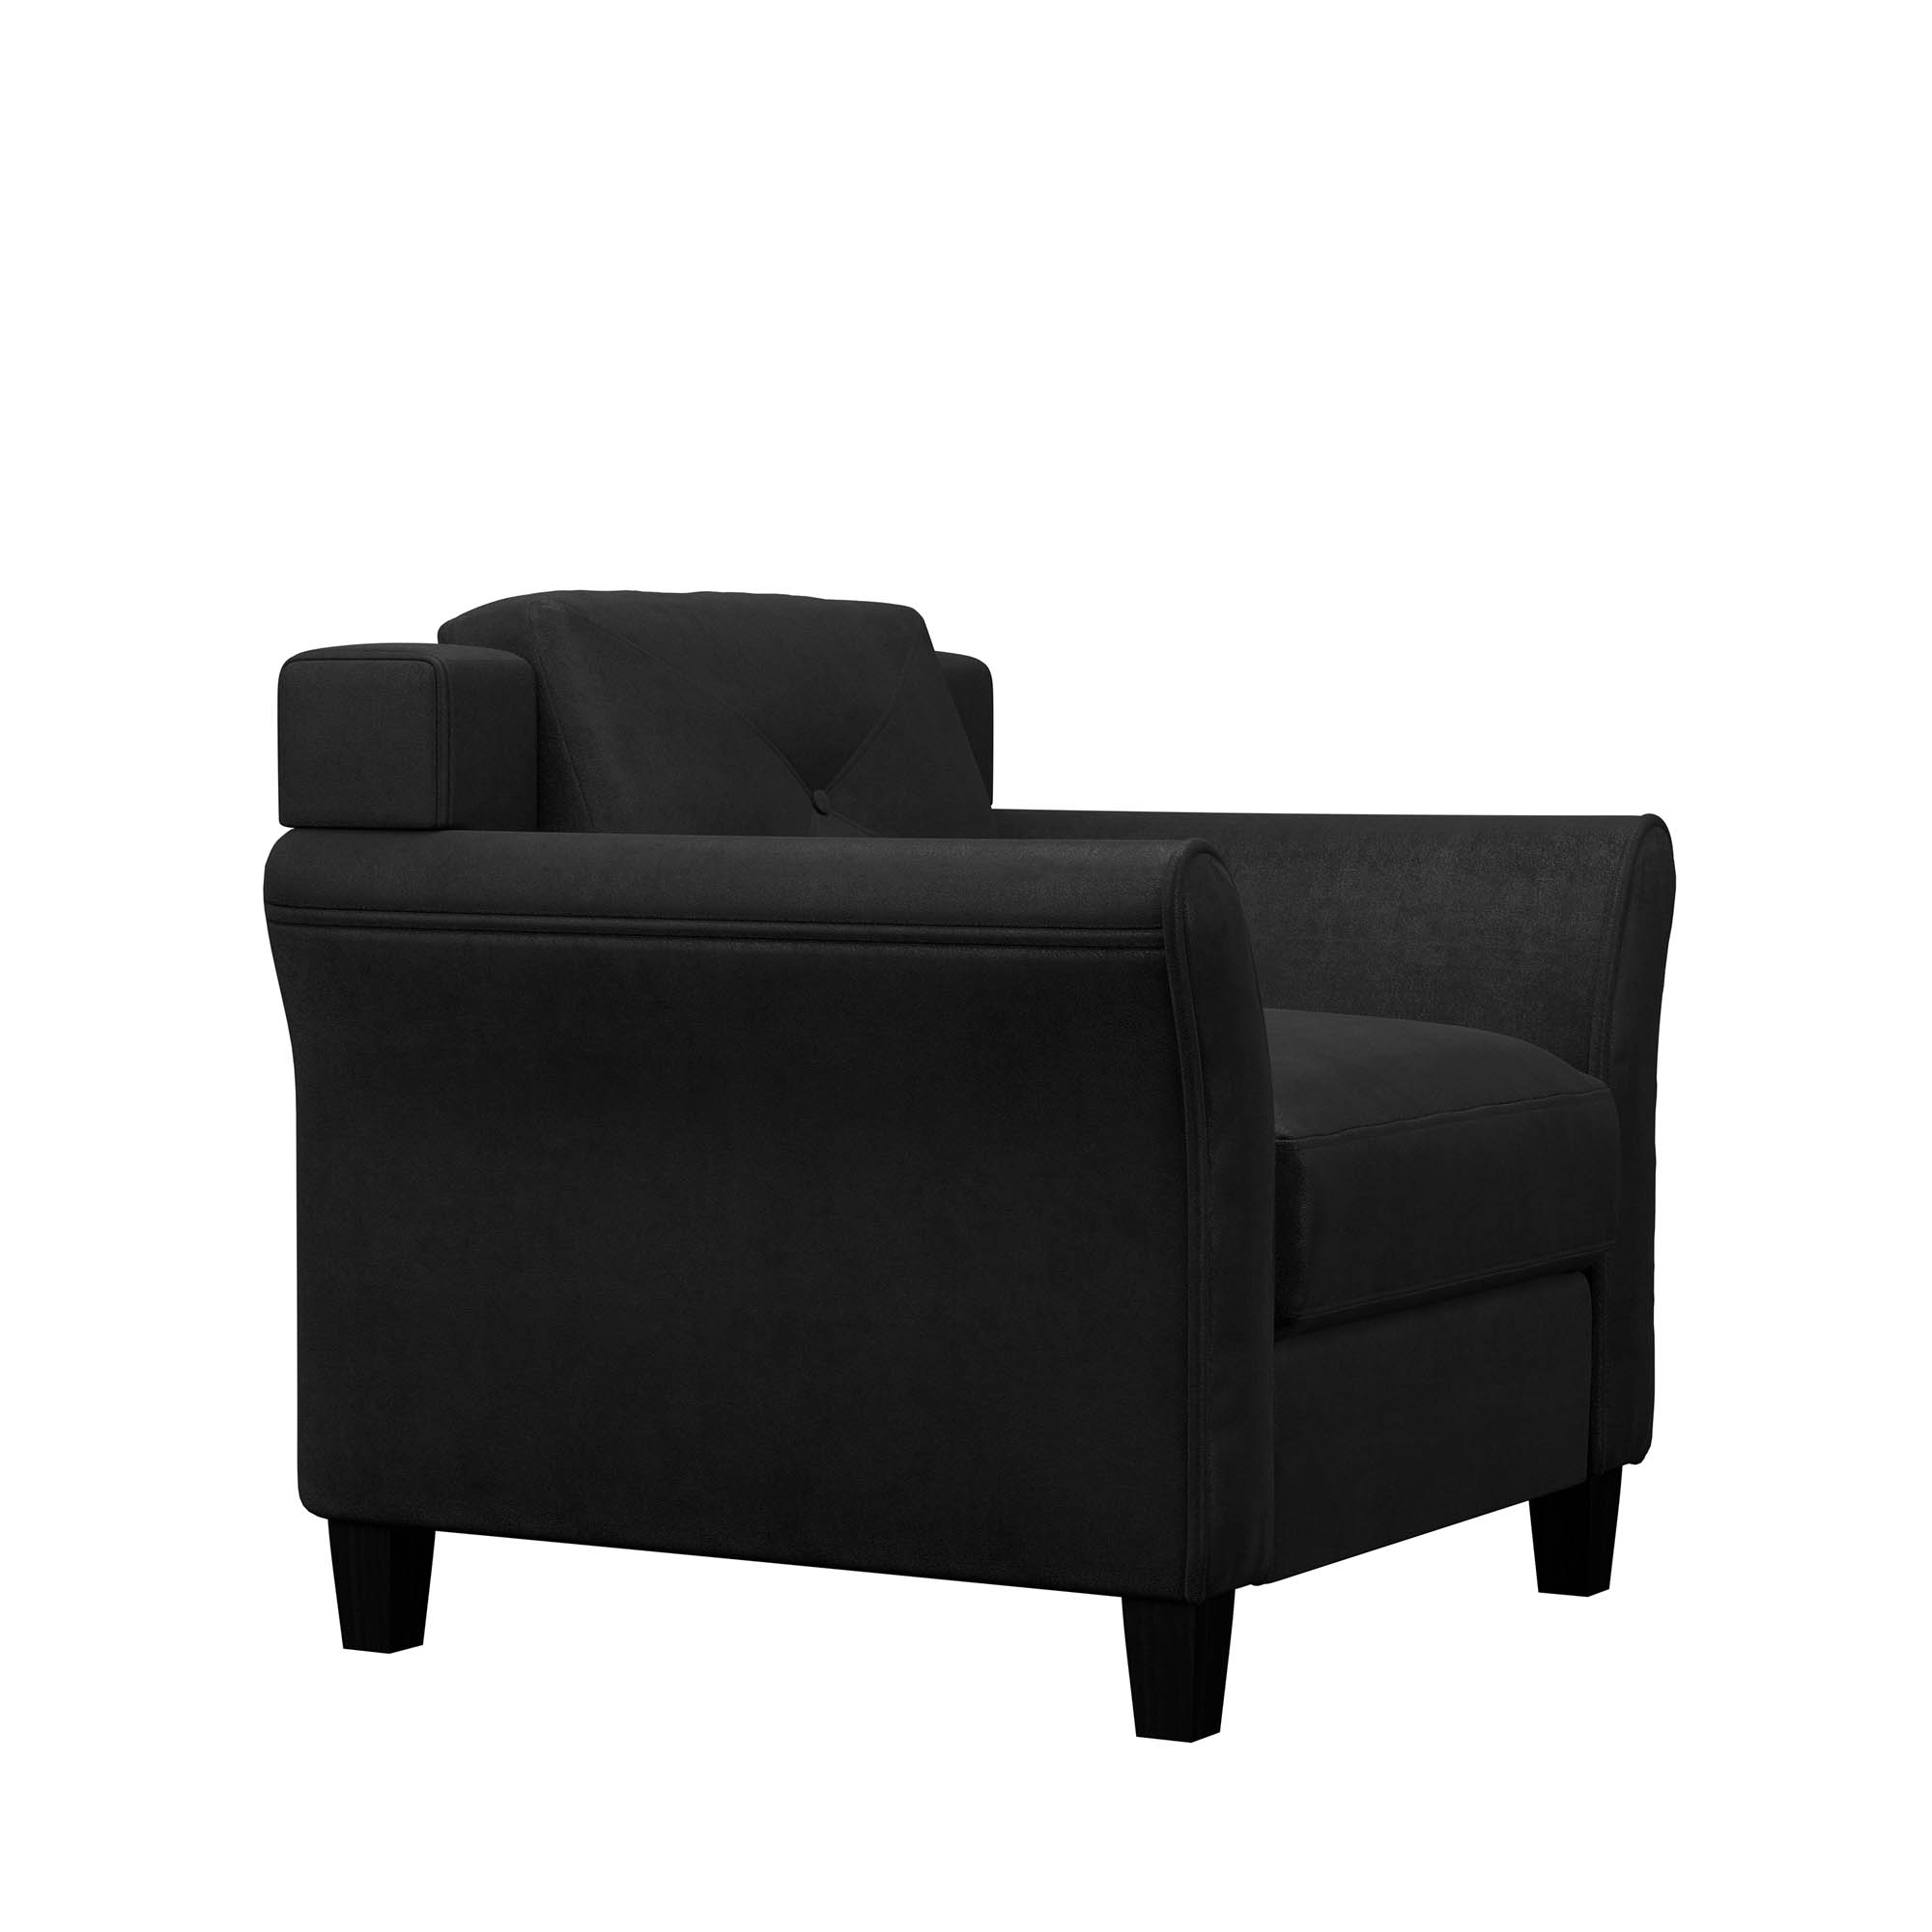 Lifestyle Solutions Taryn Club Chair, Black Fabric - image 4 of 17